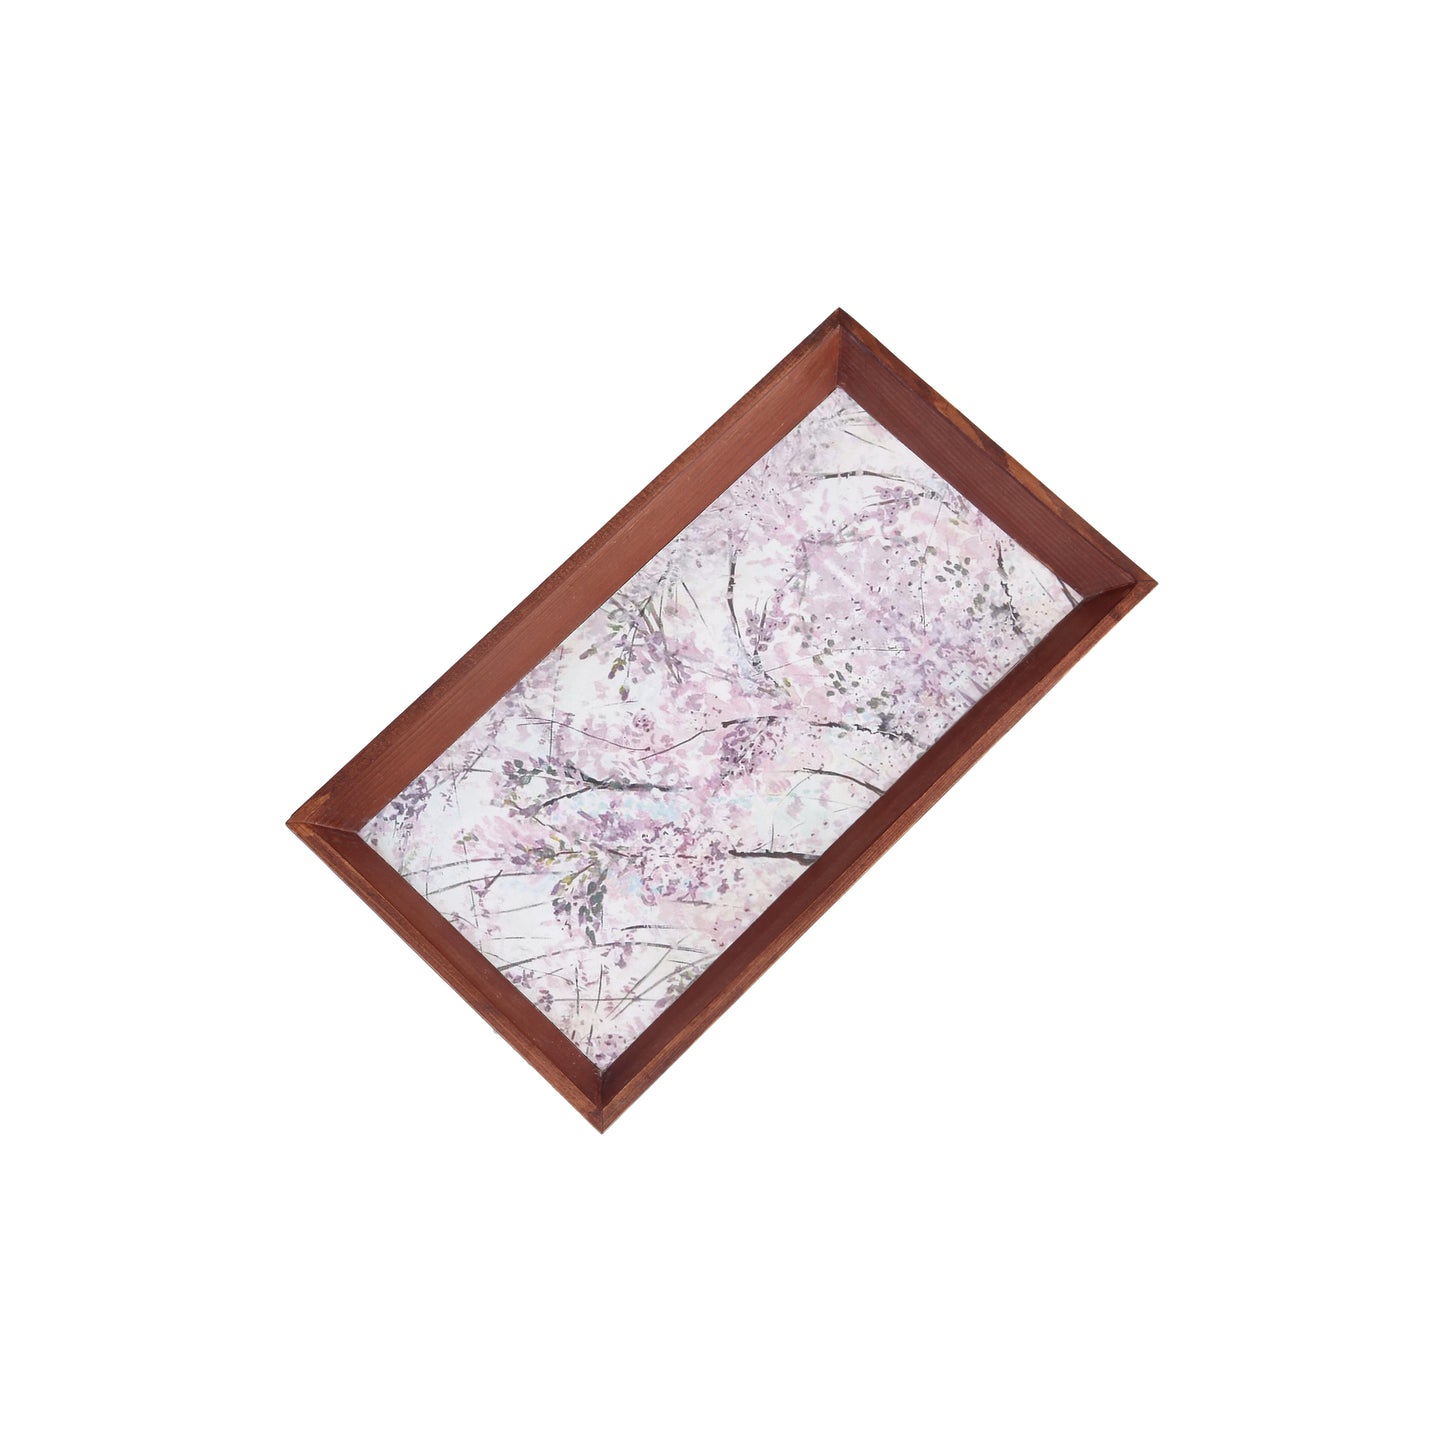 A Tiny Mistake  Wisteria Rectangle Wooden Serving Tray, 35 x 20 x 2 cm